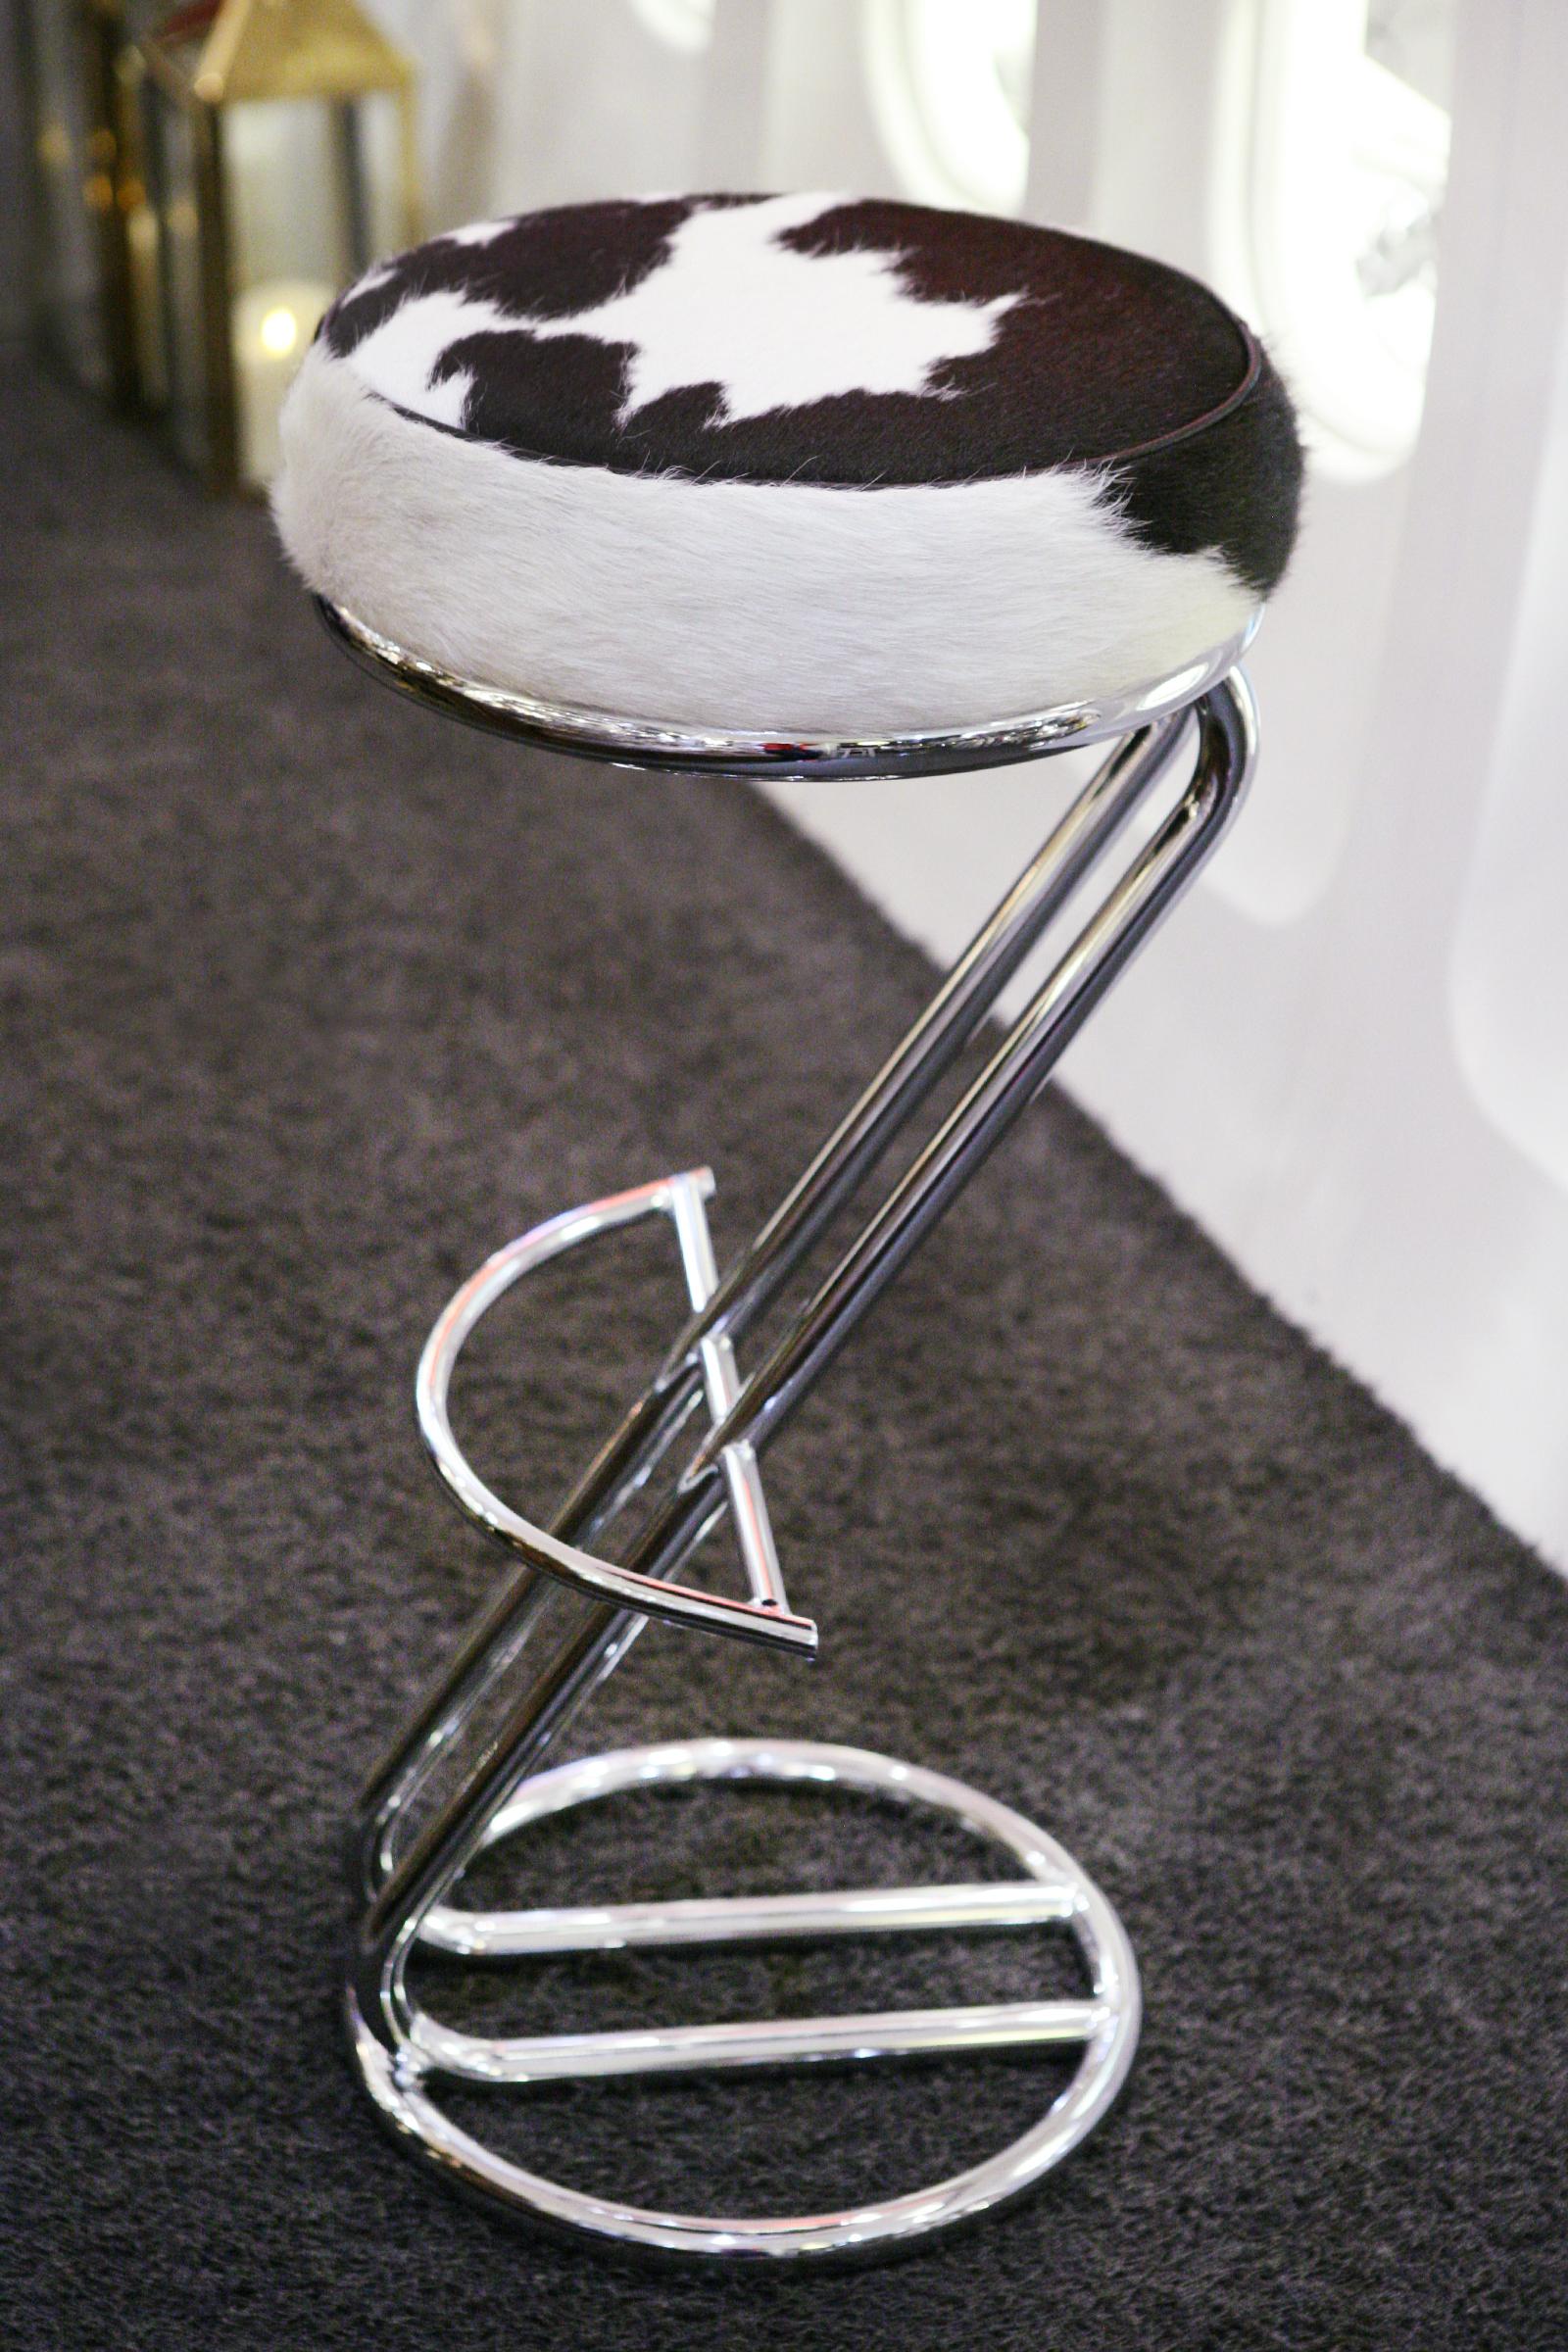 Hand-Crafted Pony 1 Bar Stool with Polished Stainless Steel Base